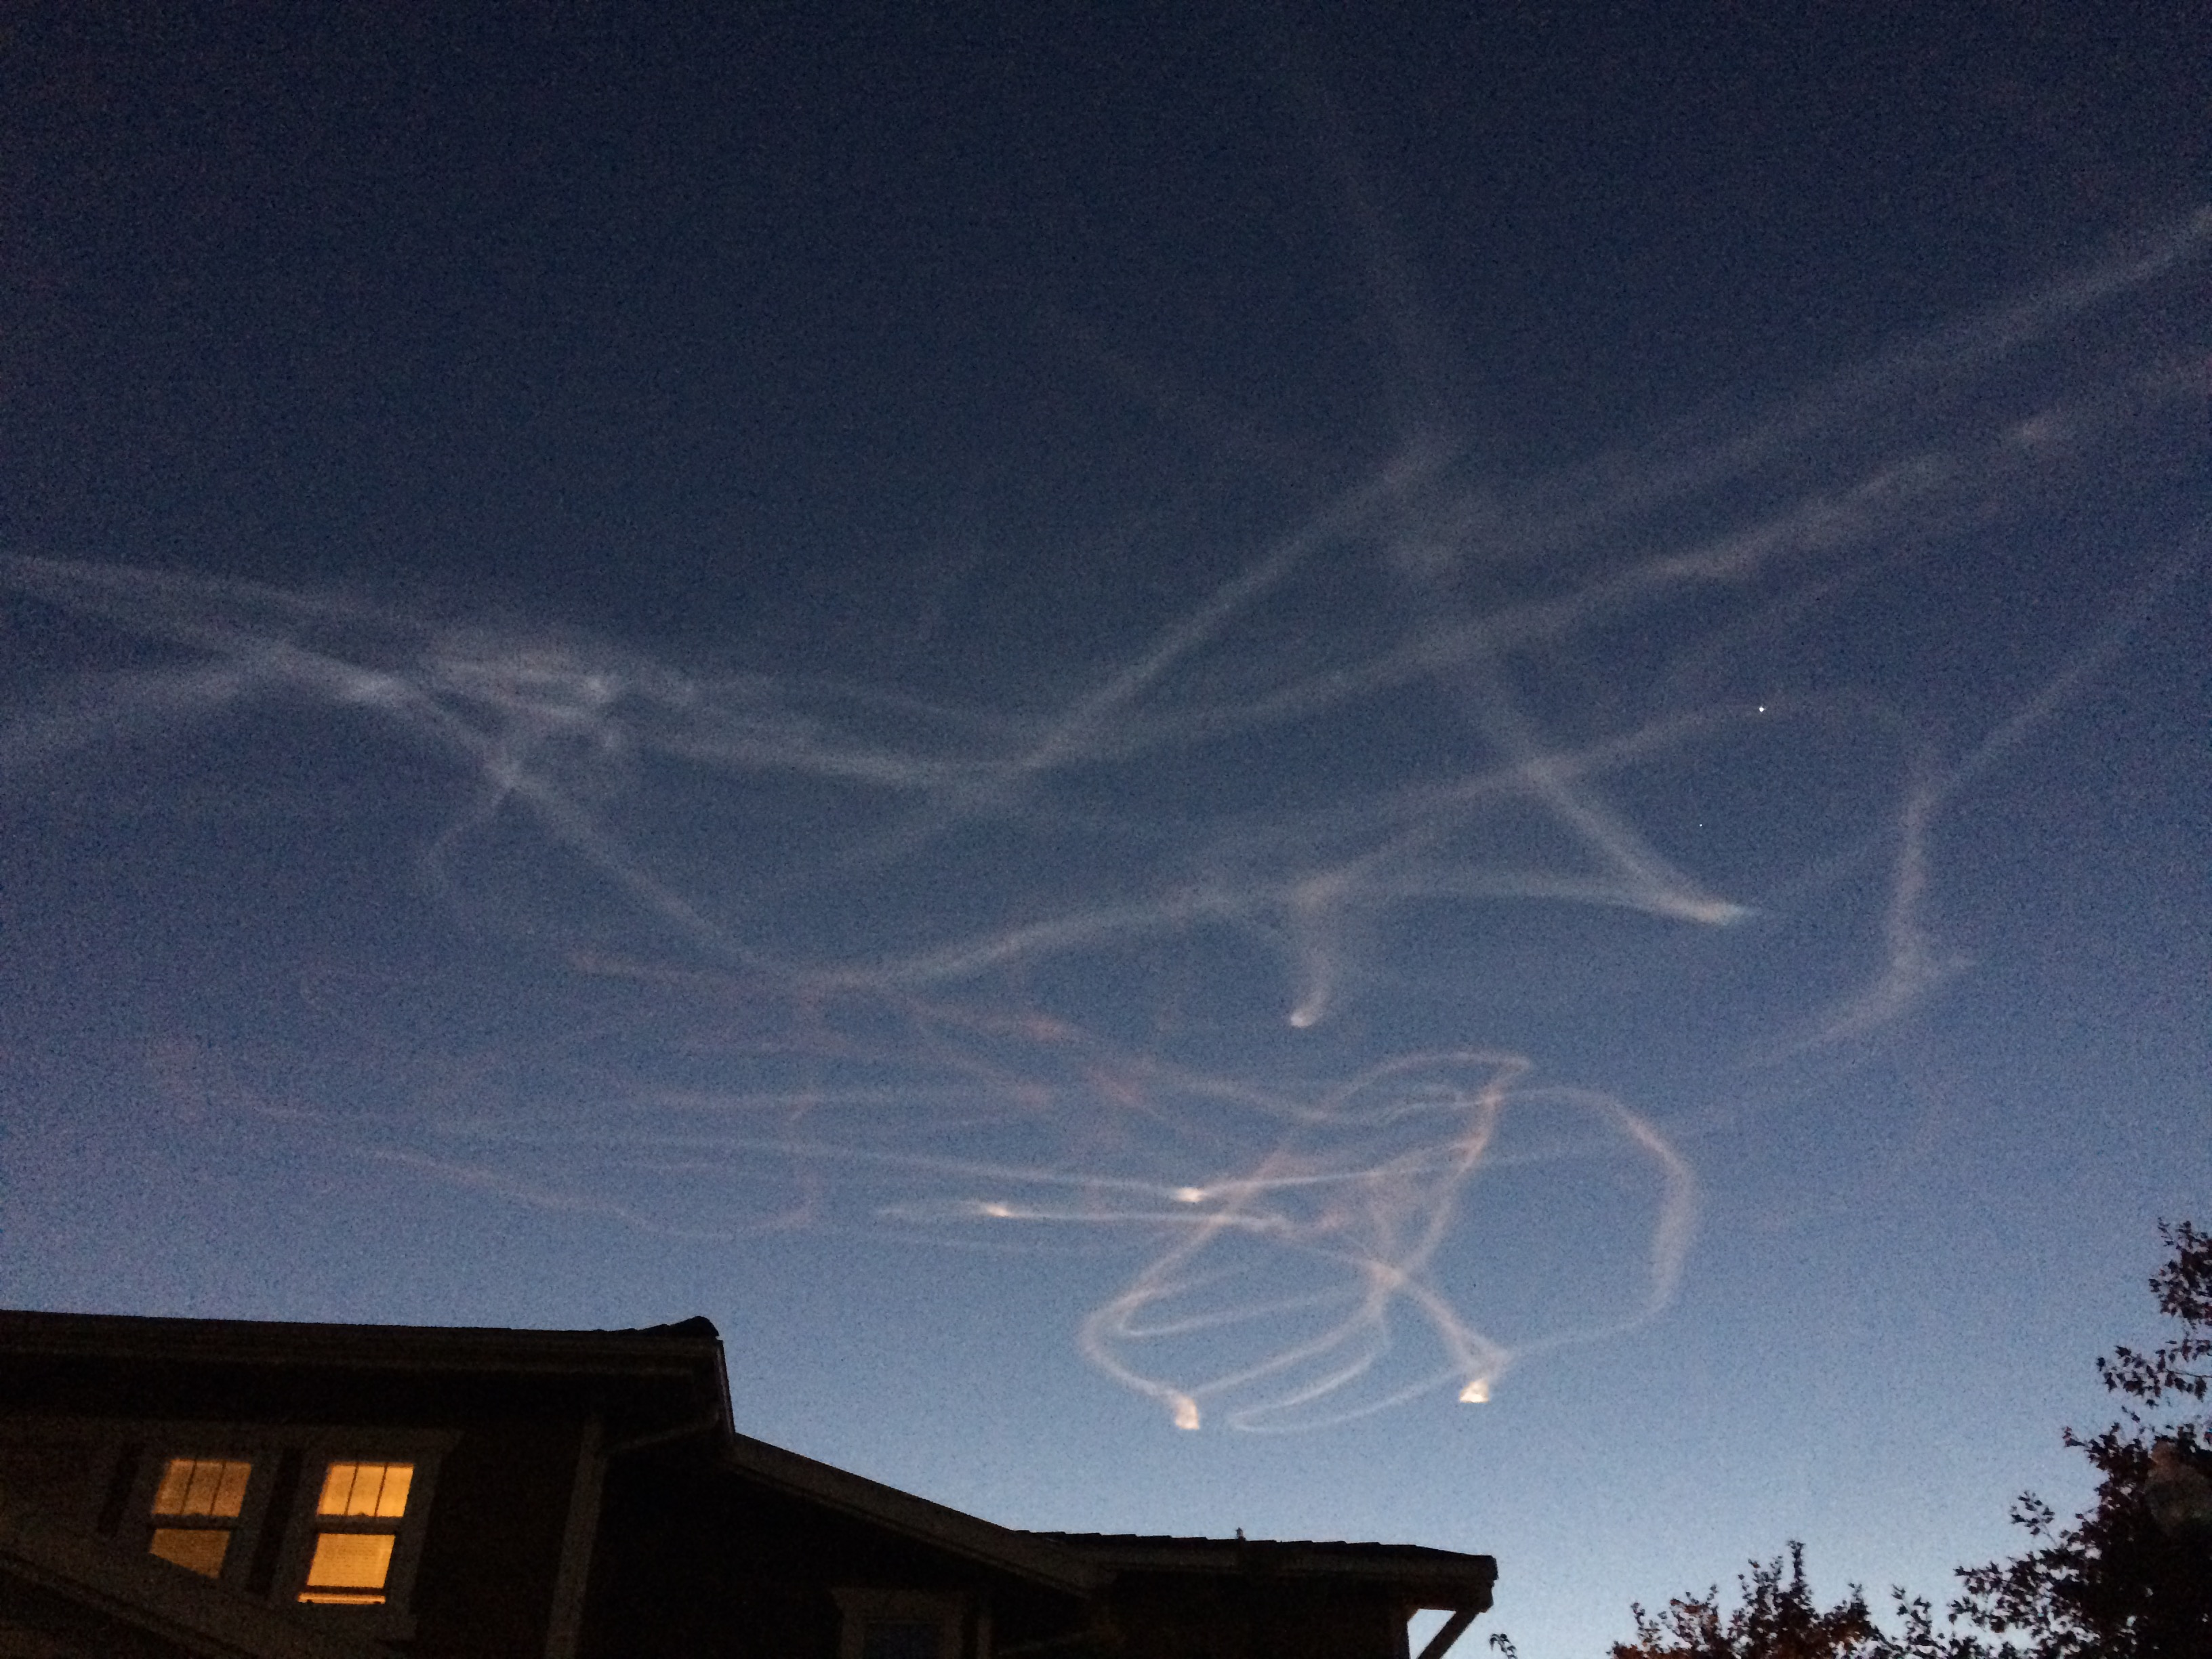 First thing this morning I looked up in the sky and seen this... What are your thoughts?